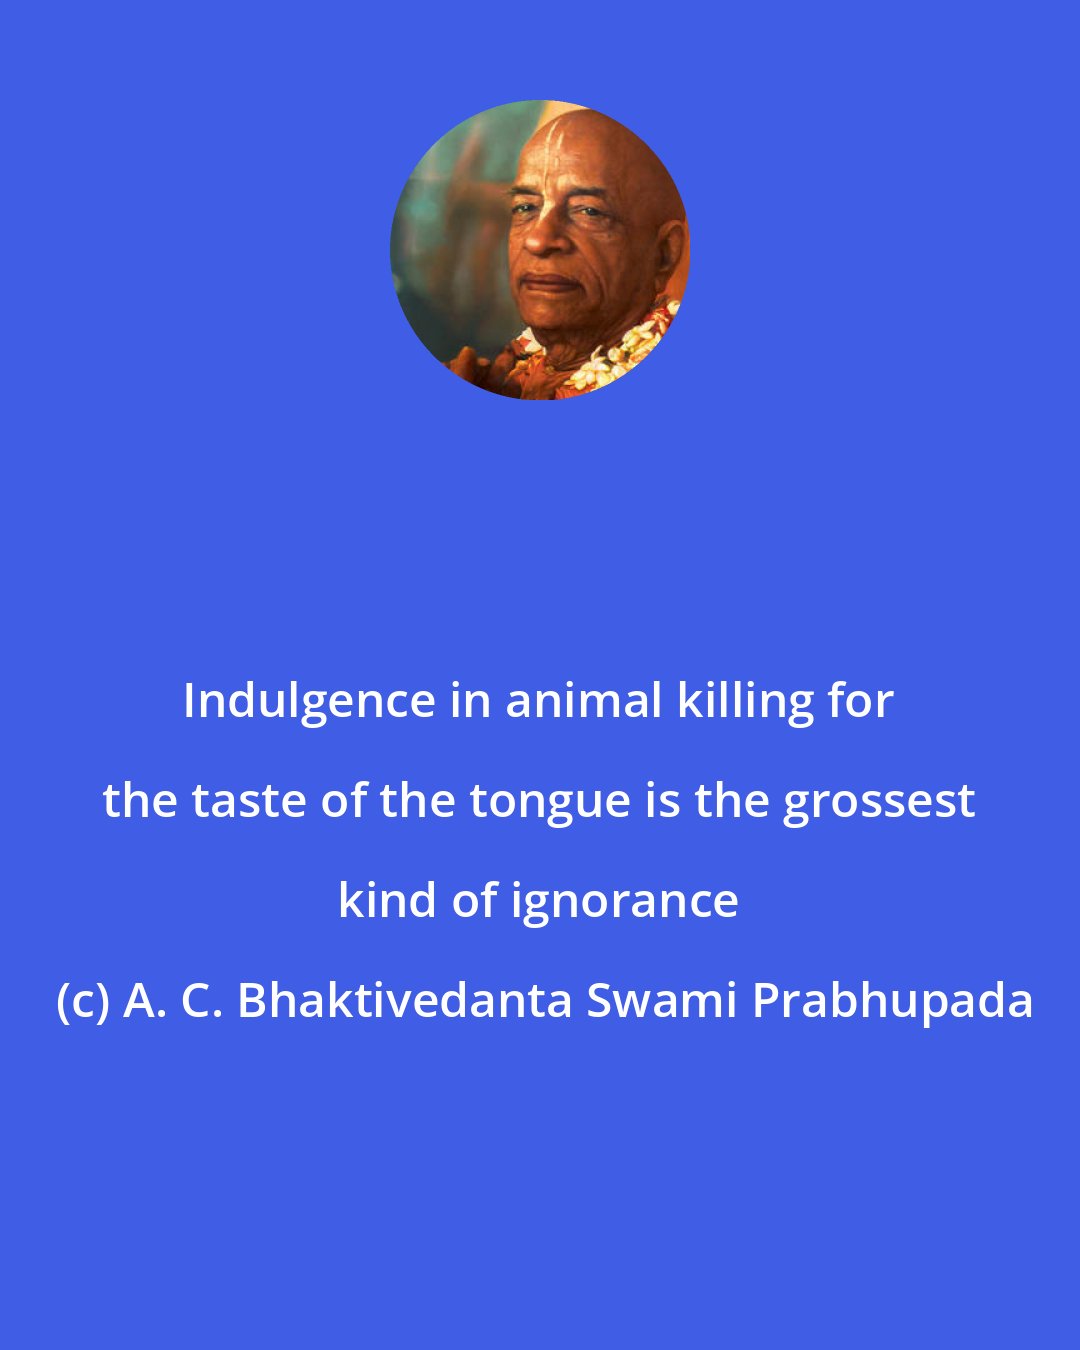 A. C. Bhaktivedanta Swami Prabhupada: Indulgence in animal killing for the taste of the tongue is the grossest kind of ignorance